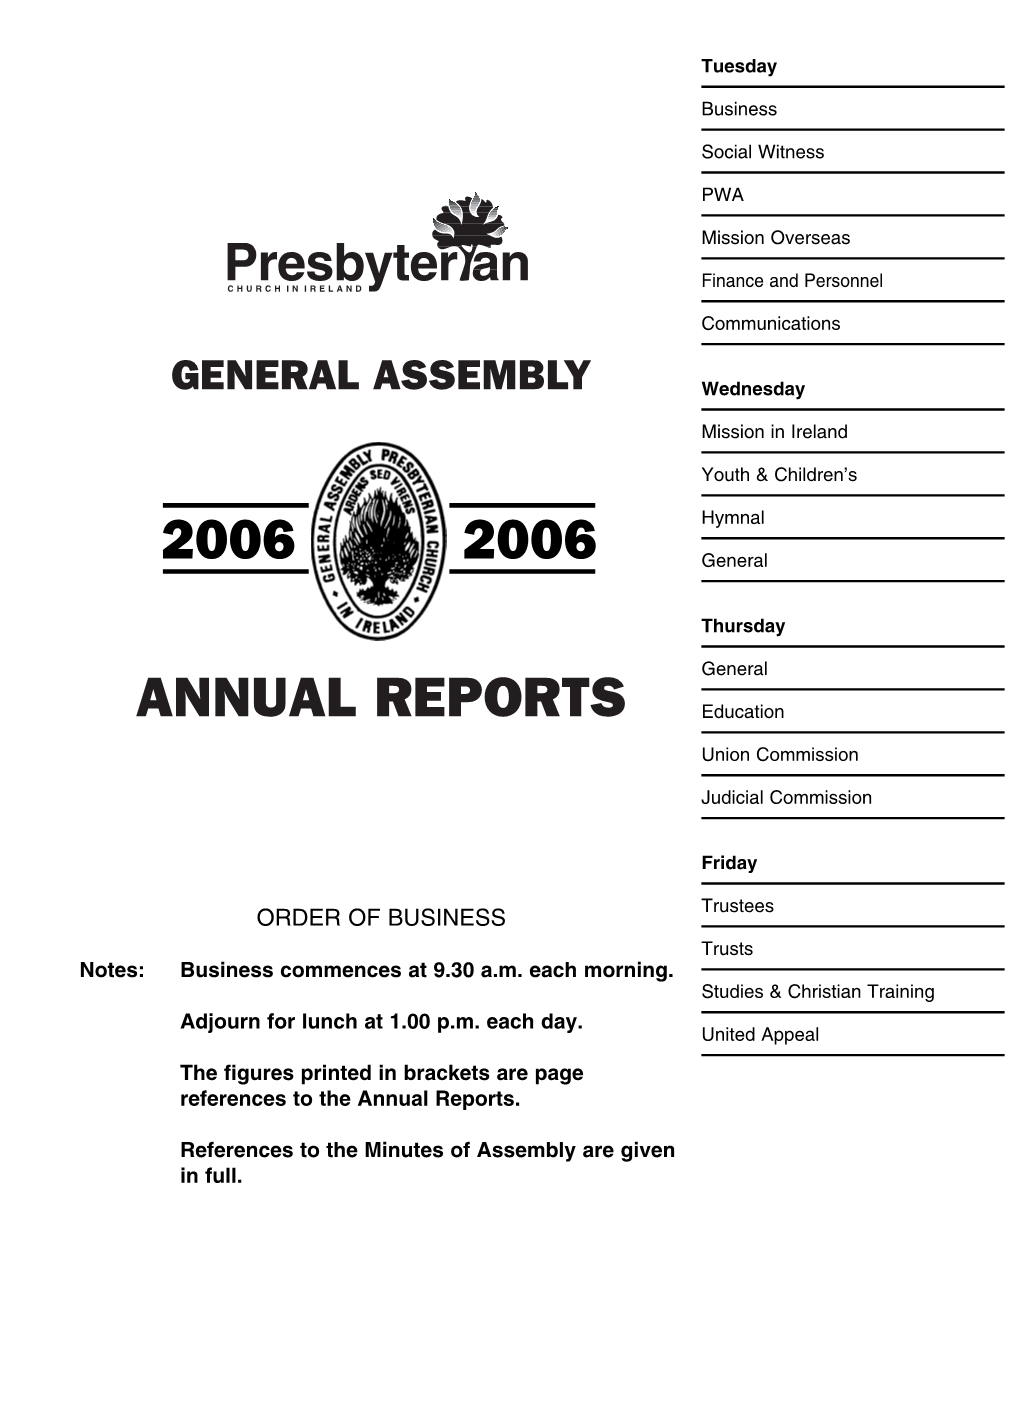 Reports to the General Assembly 2006